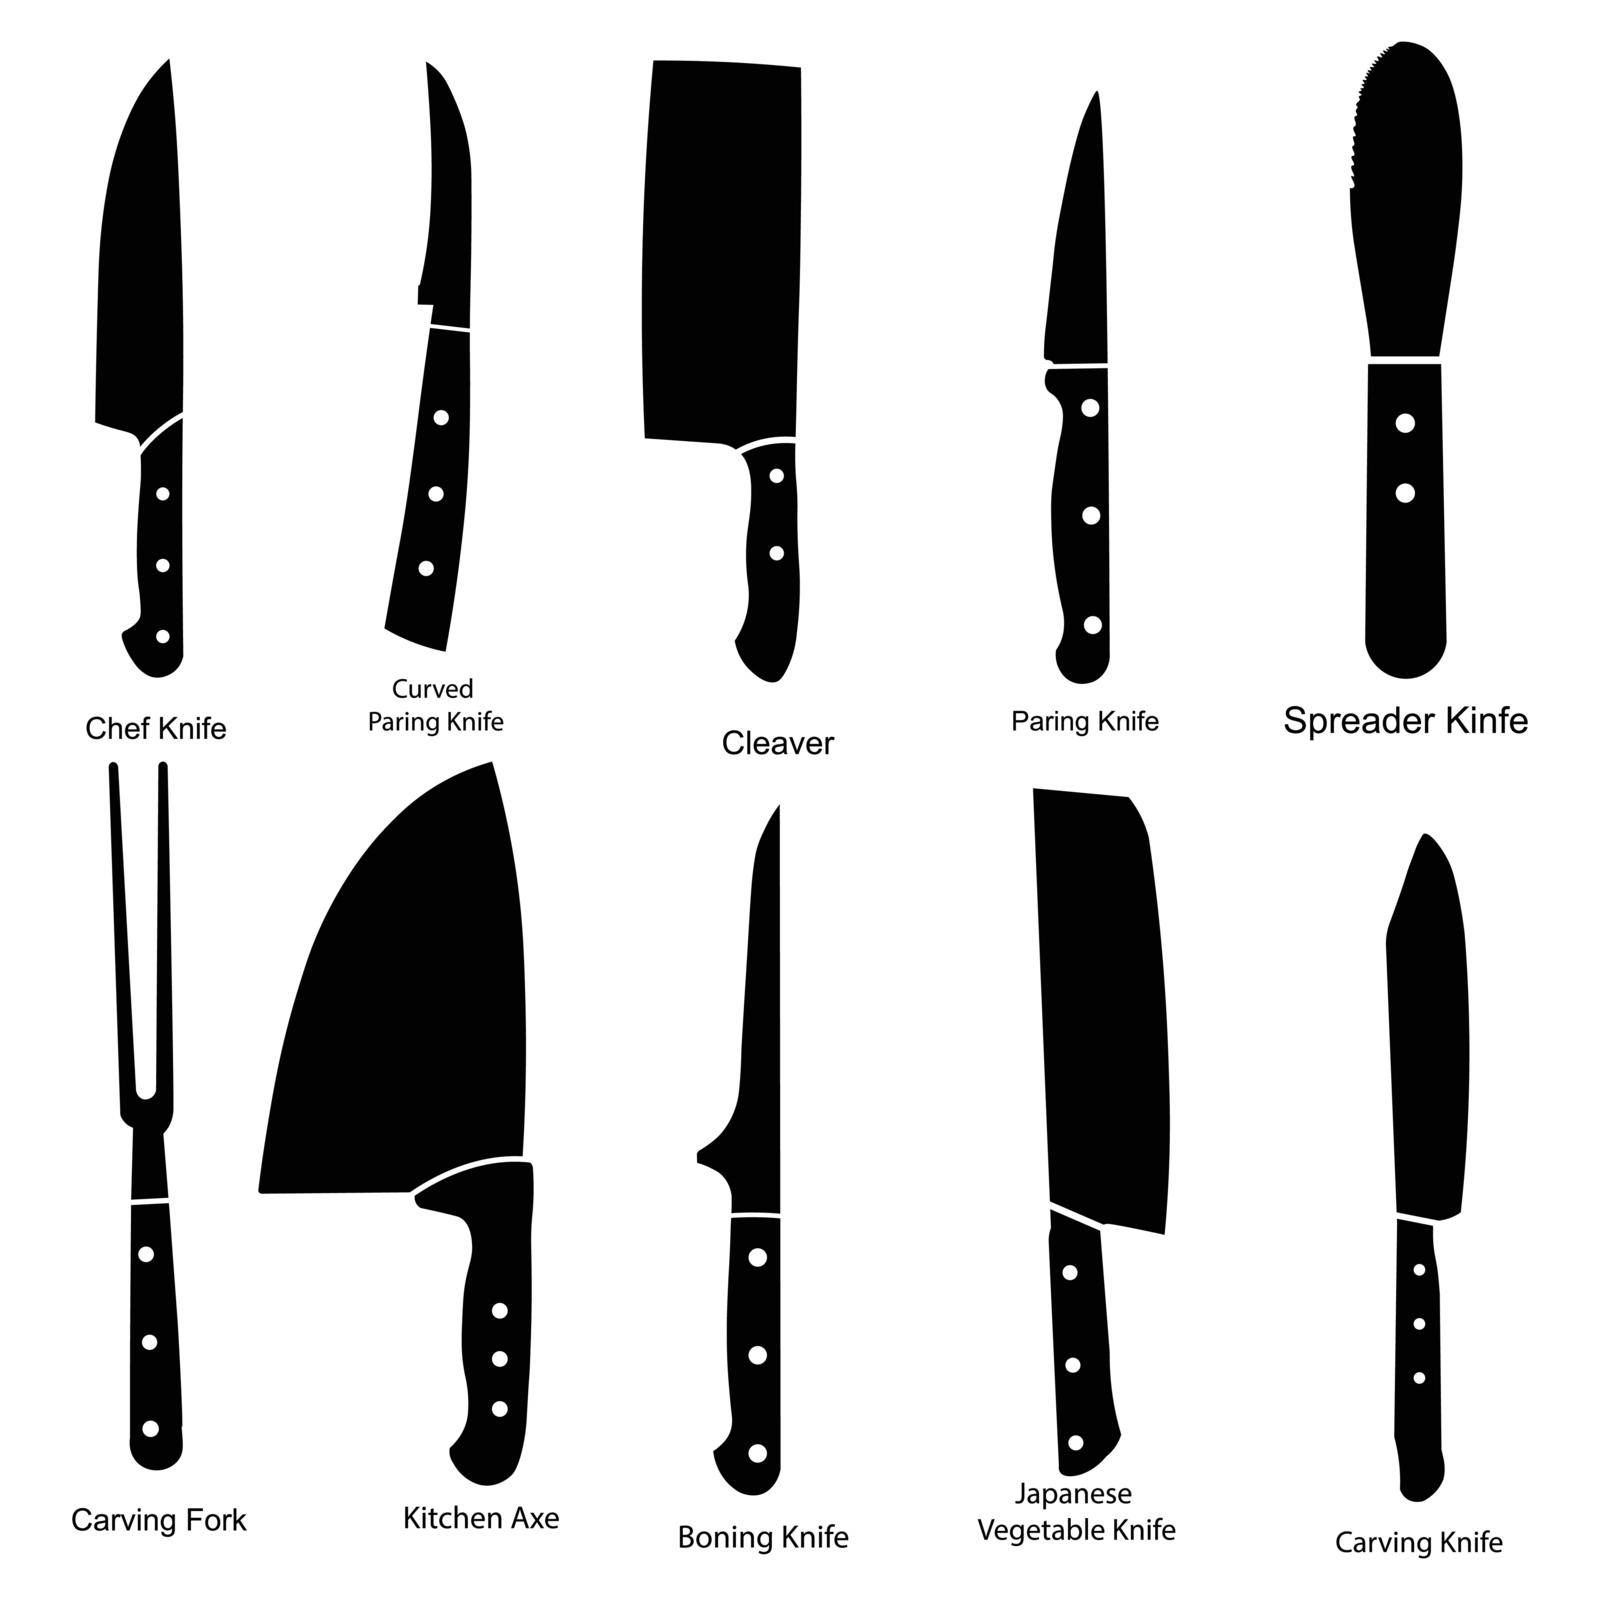 A set of kitchen knives pictogram icons. Chef knife, curved paring, cleaver, paring knife, spreader, carving fork, kitchen axe, boning, japanese vegetable, carving knife isolated on a white background. EPS Vector by xileodesigns